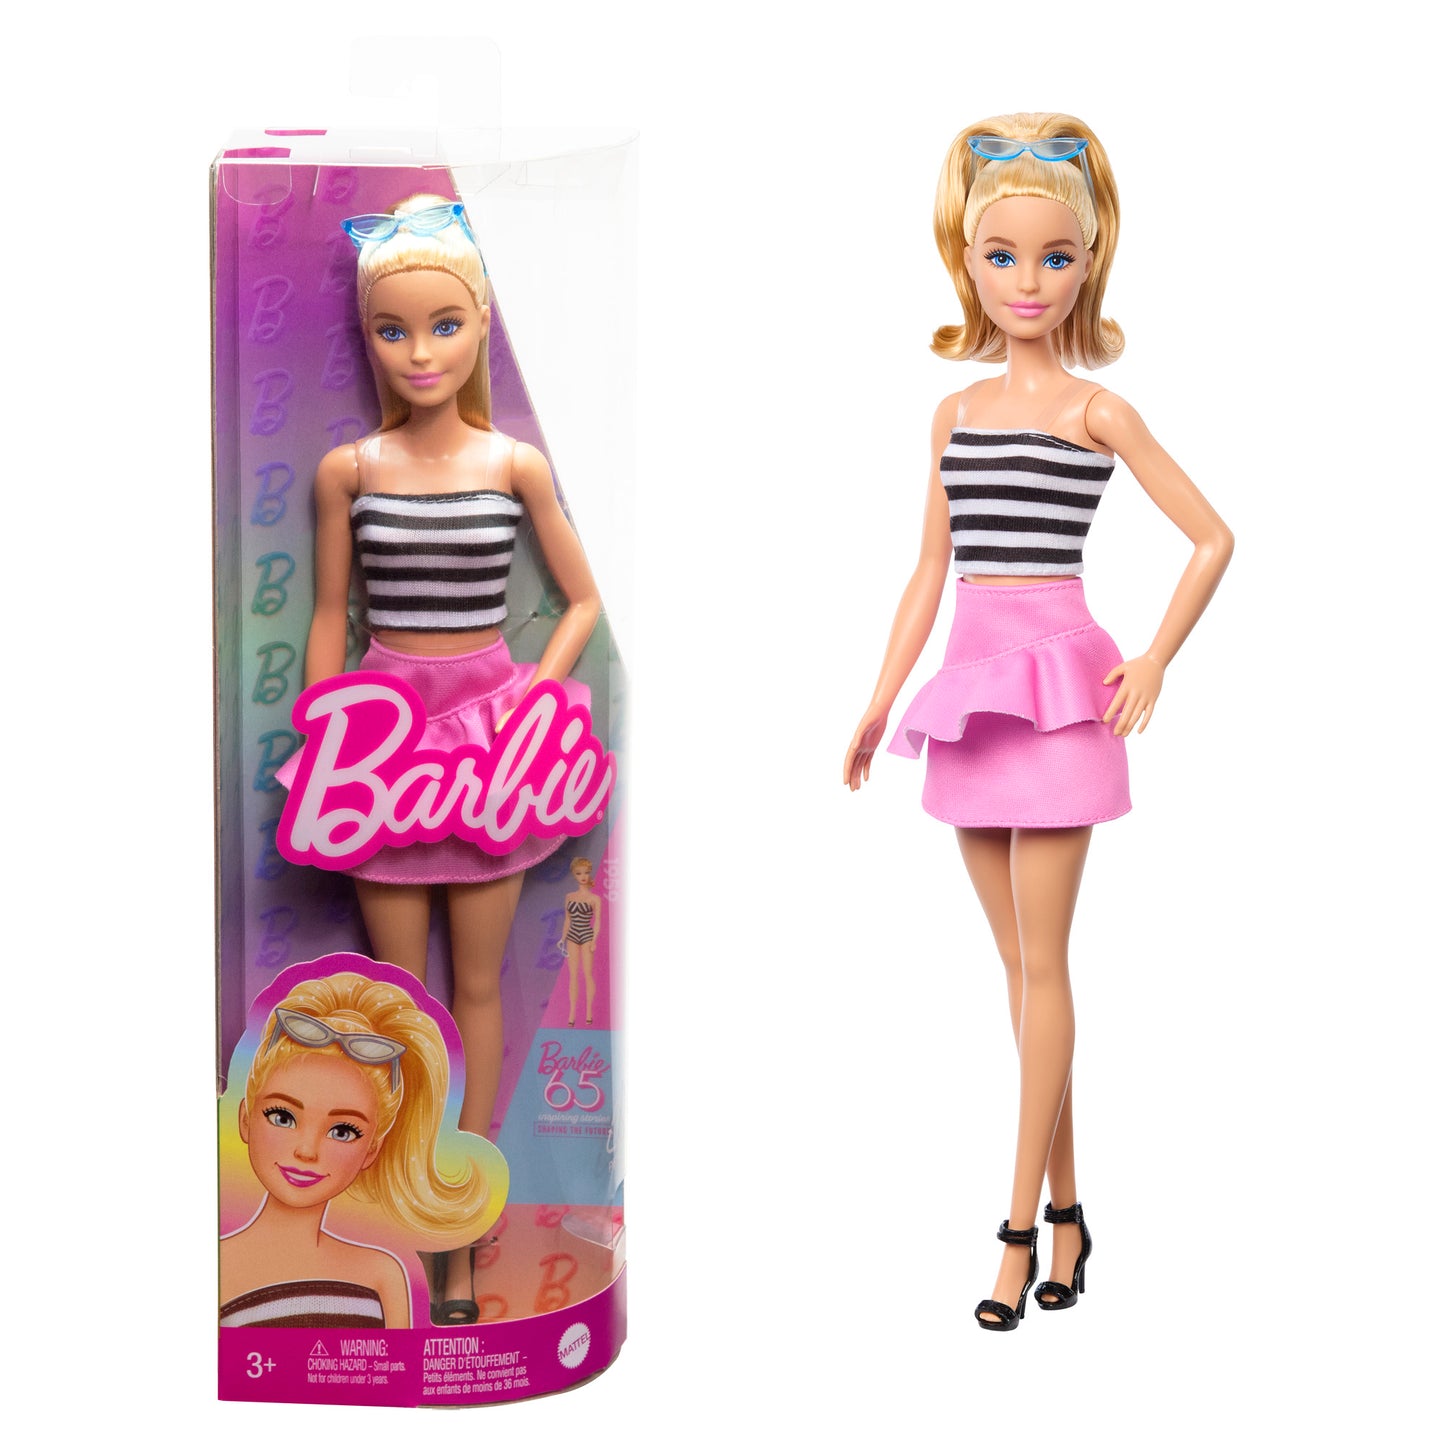 Barbie Fashionistas Doll #213, Blonde with Striped Top, Pink Skirt & Sunglasses